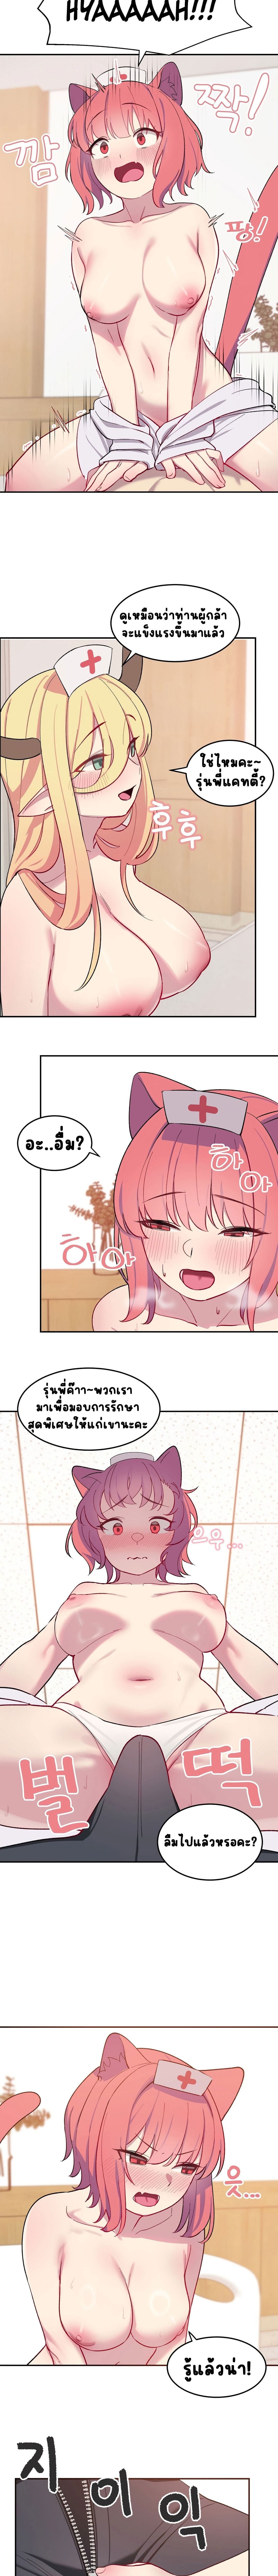 Hospitalized Life in Another World ตอนที่ 2 ภาพ 2